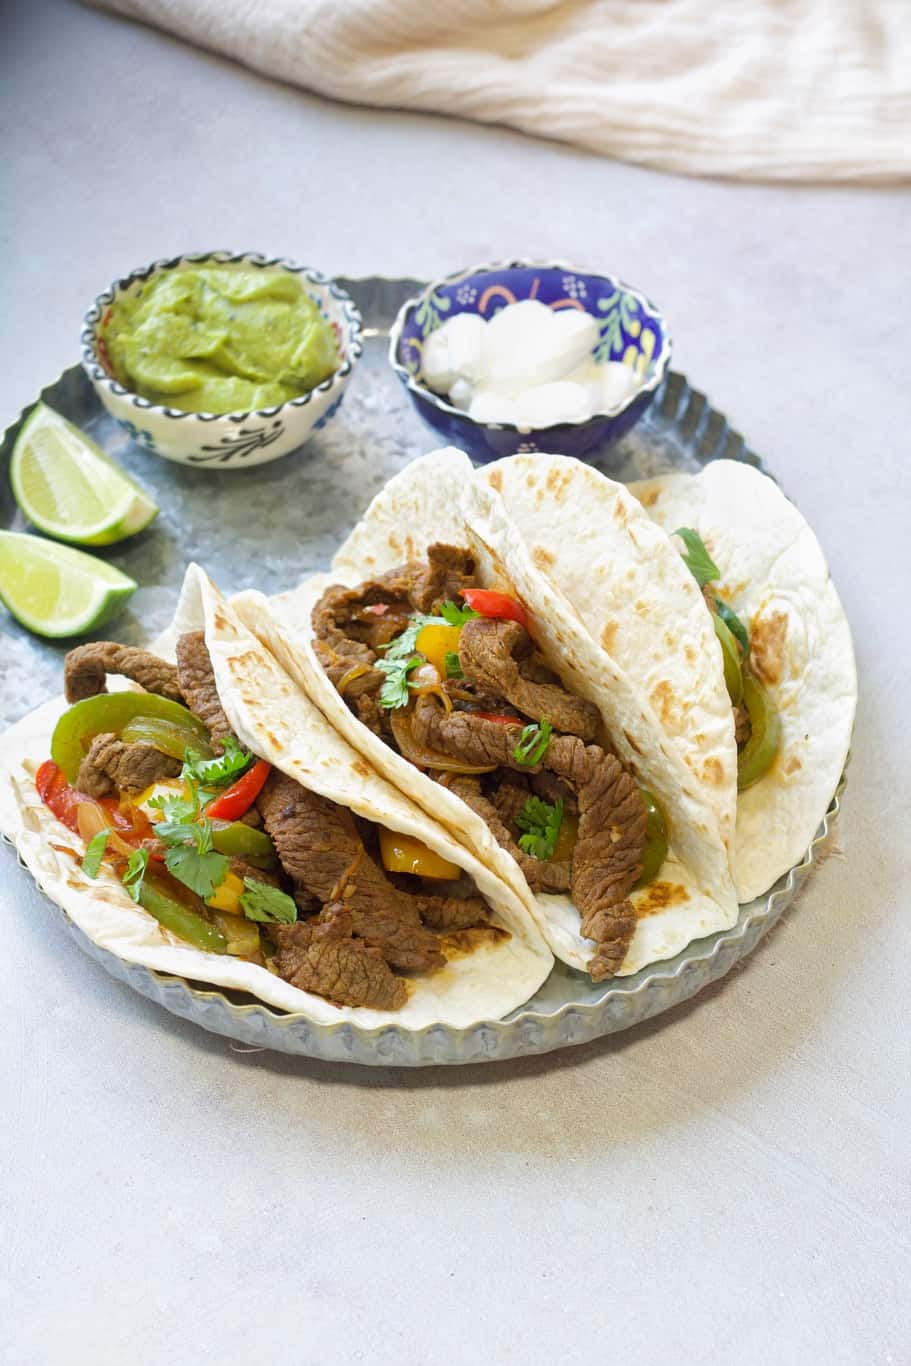 warm low-carb tortillas filled with keto beef fajitas served with lime wedges, guacamole, and sour cream